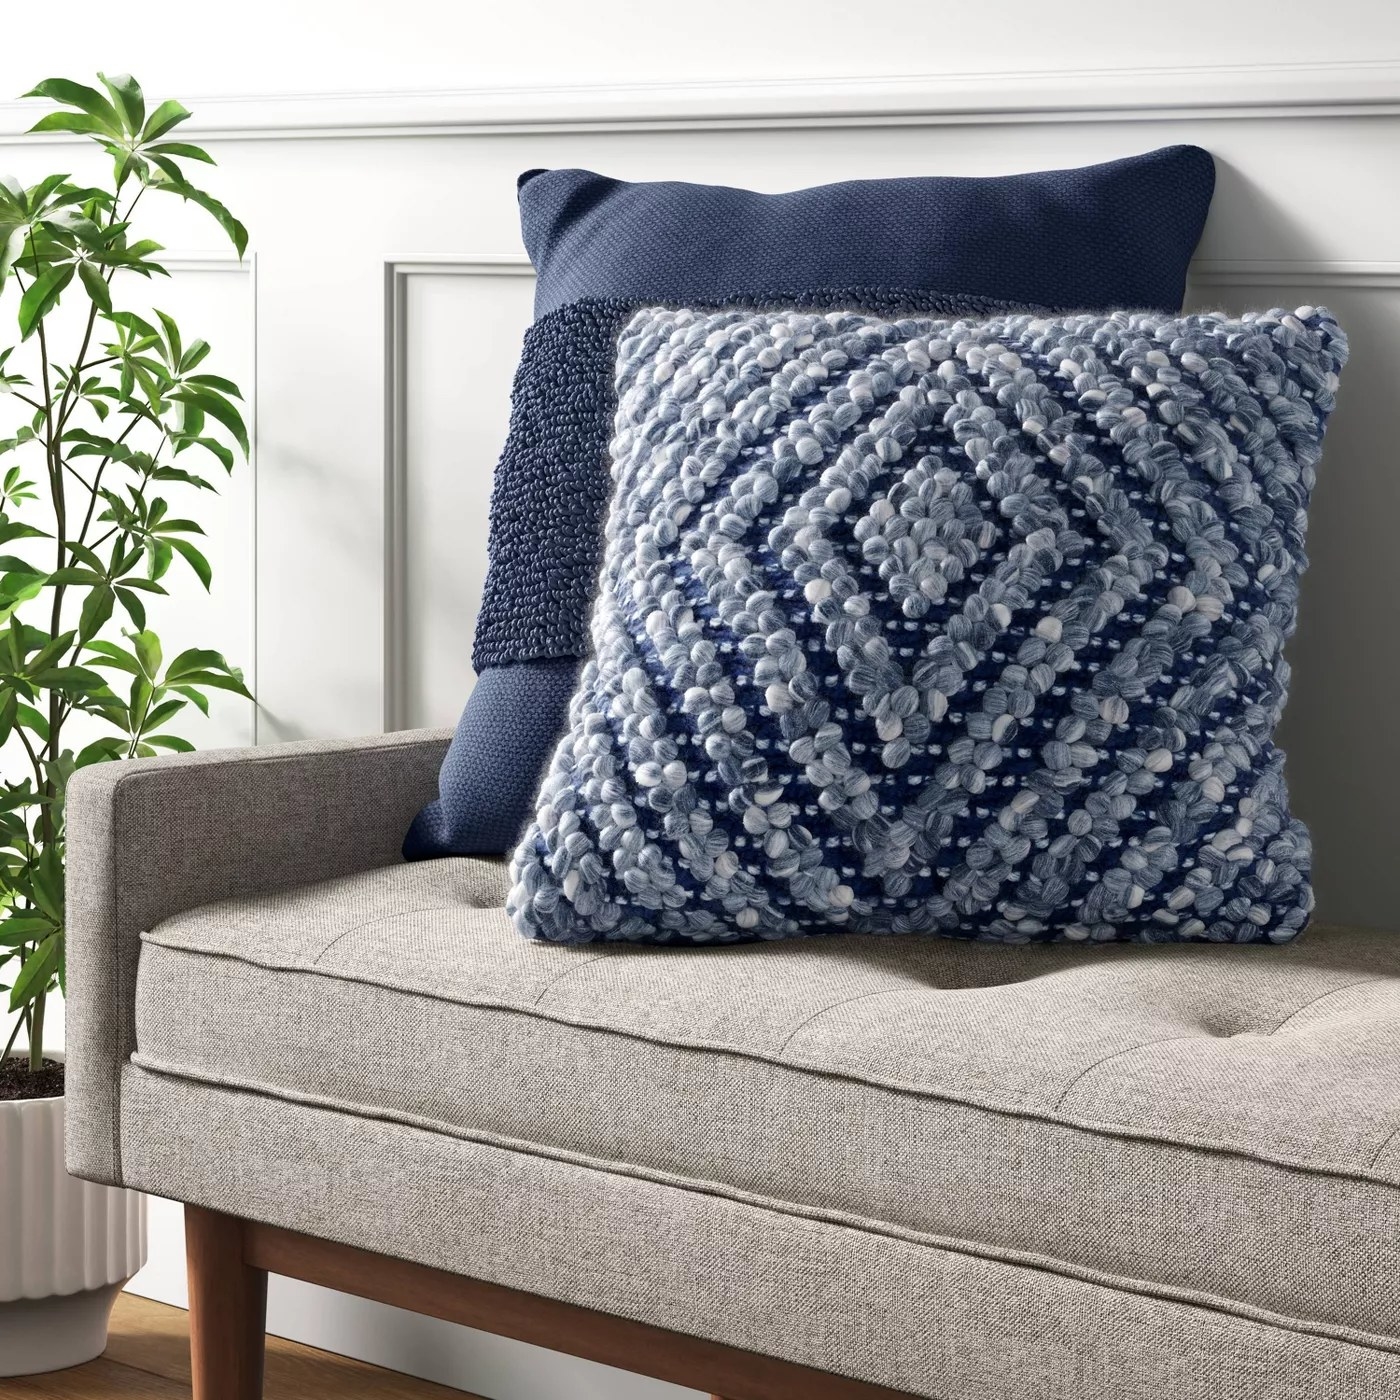 The blue throw pillow with a diamond pattern on a bench